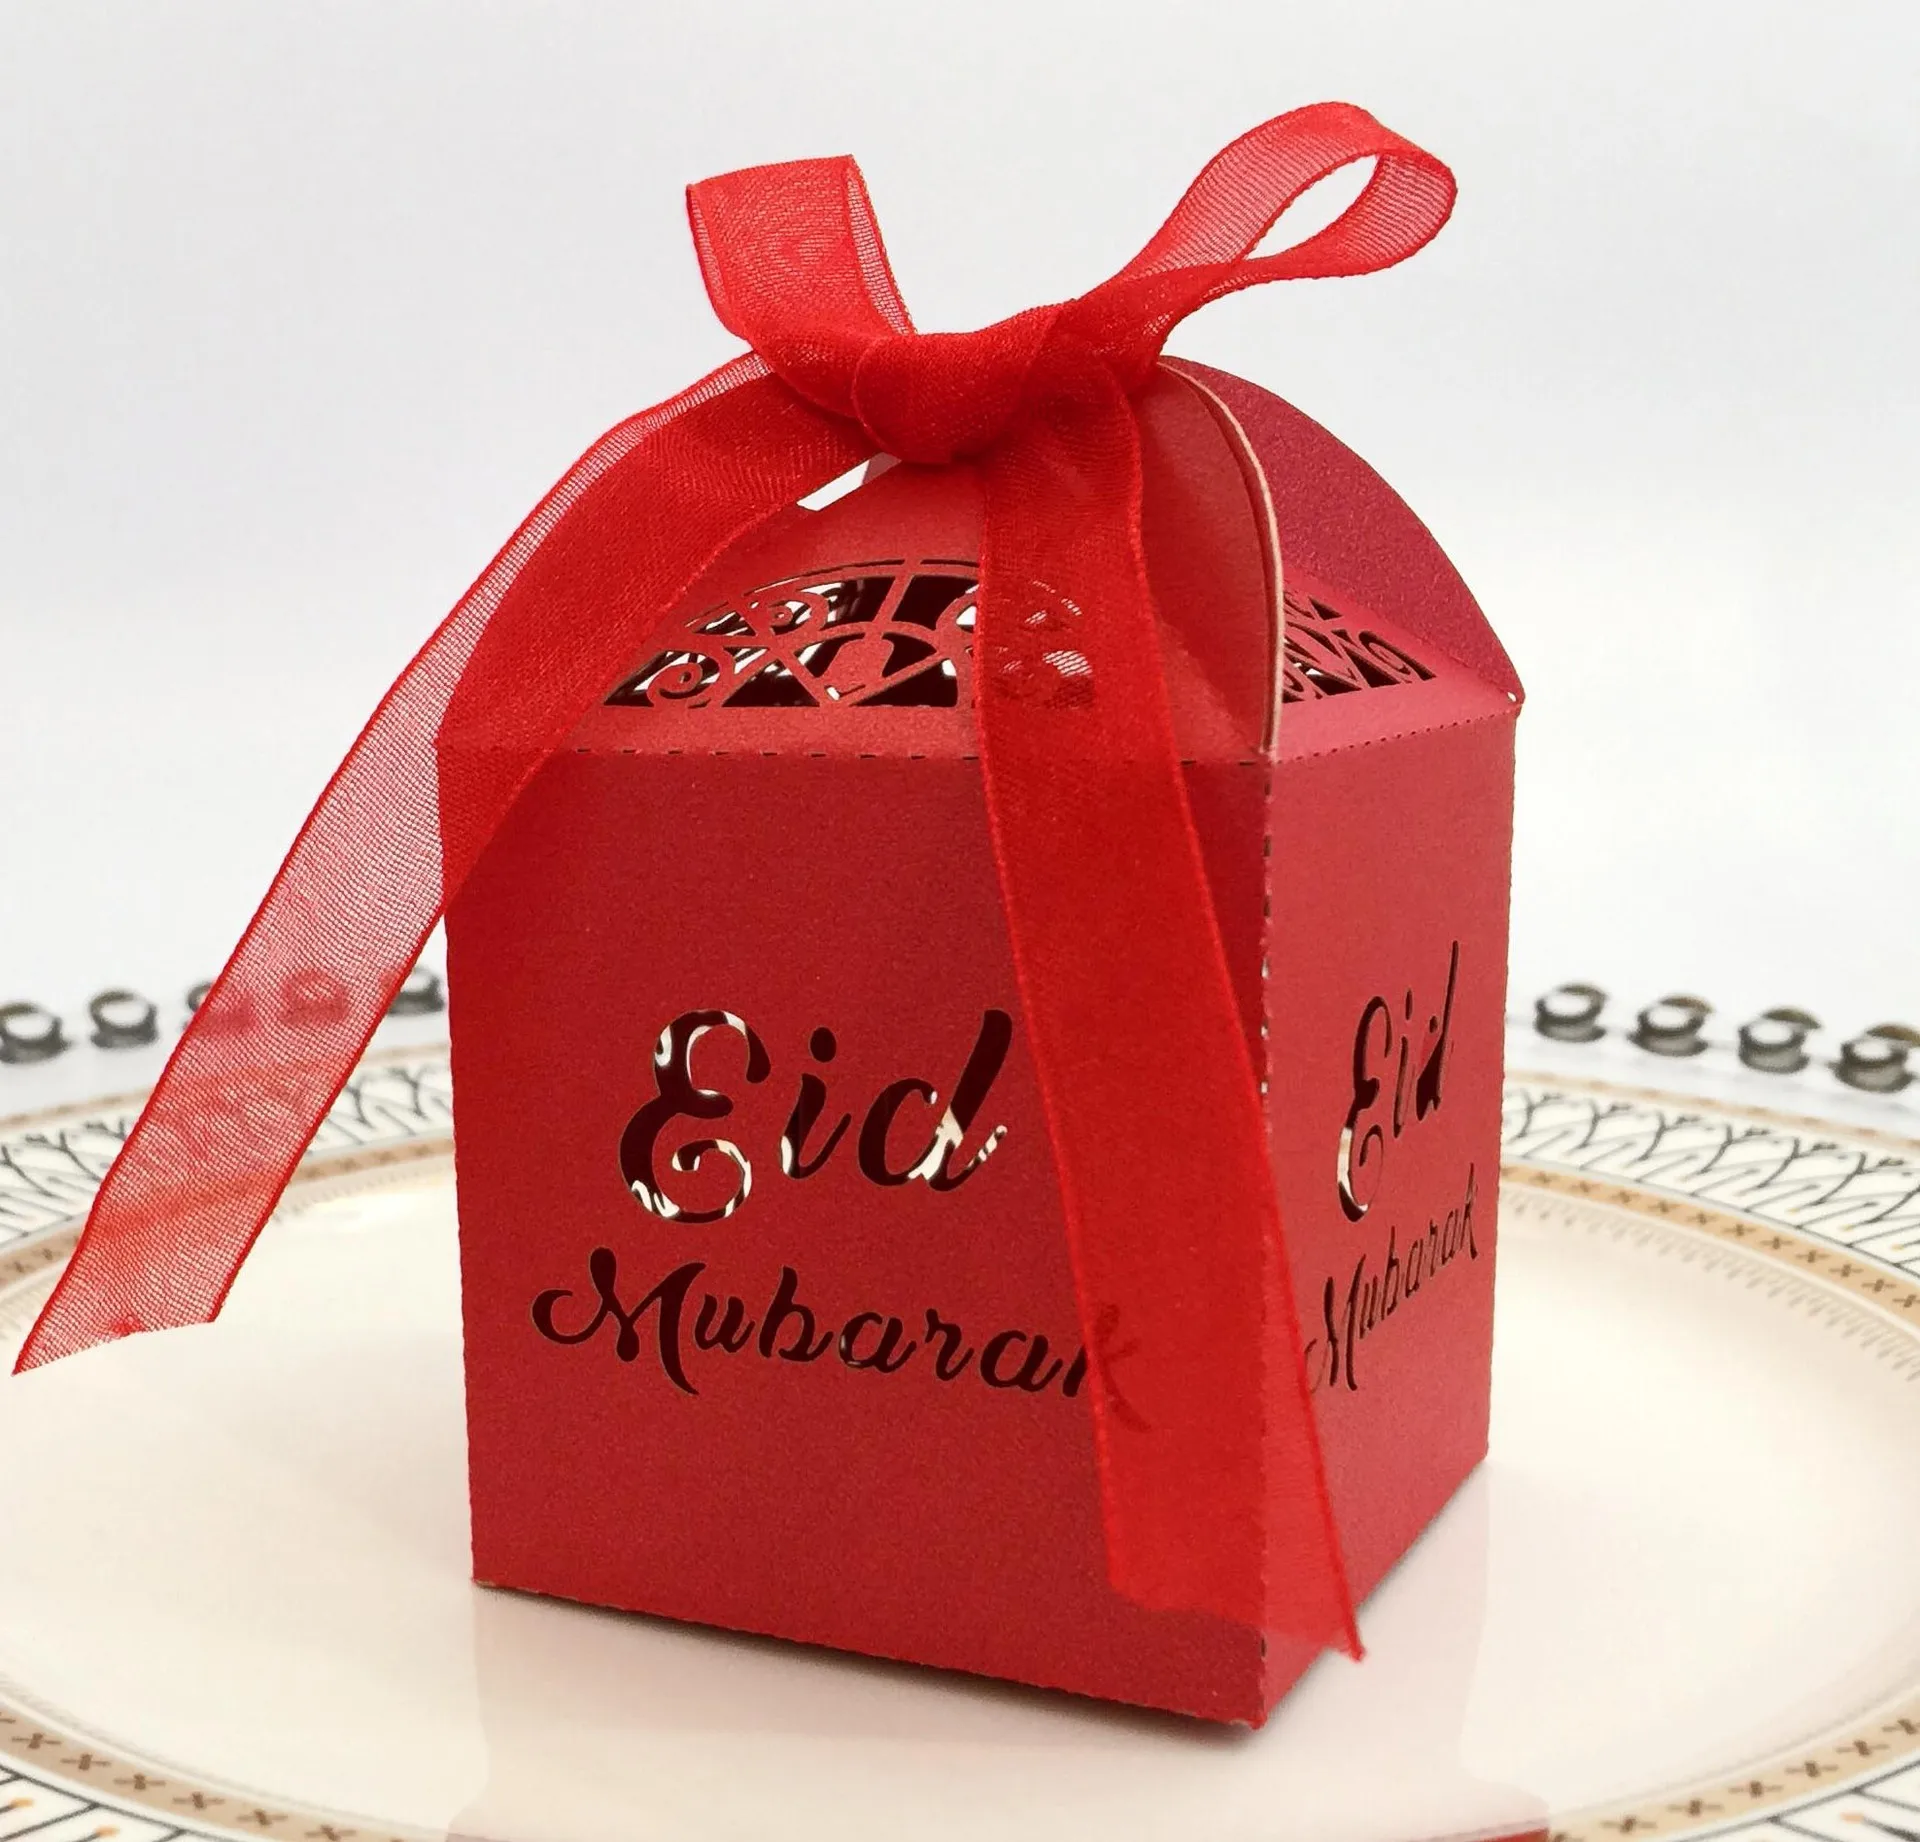 Xin store Wedding Party Favor Candy Boxes with Gold Ribbon Pack of 100 